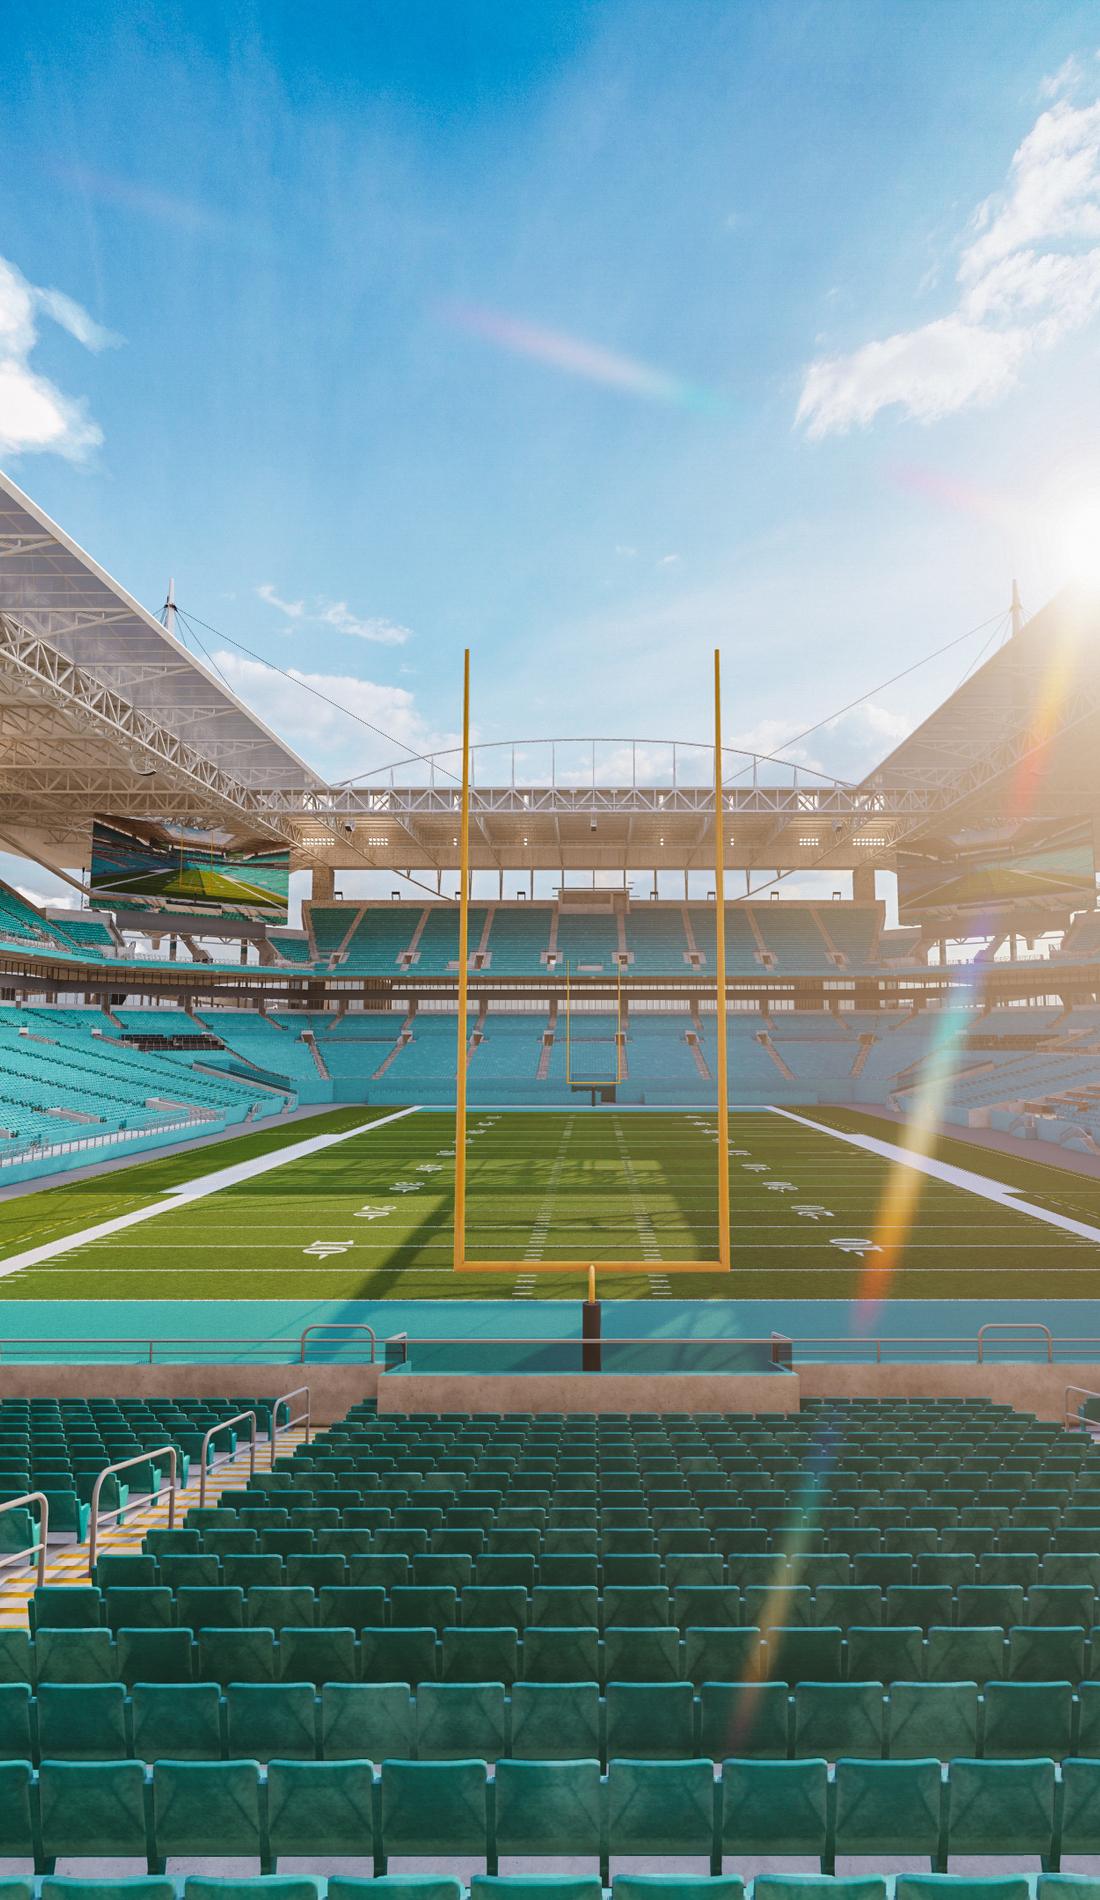 Nfl Miami Dolphins Tickets Sweden, SAVE 35% 